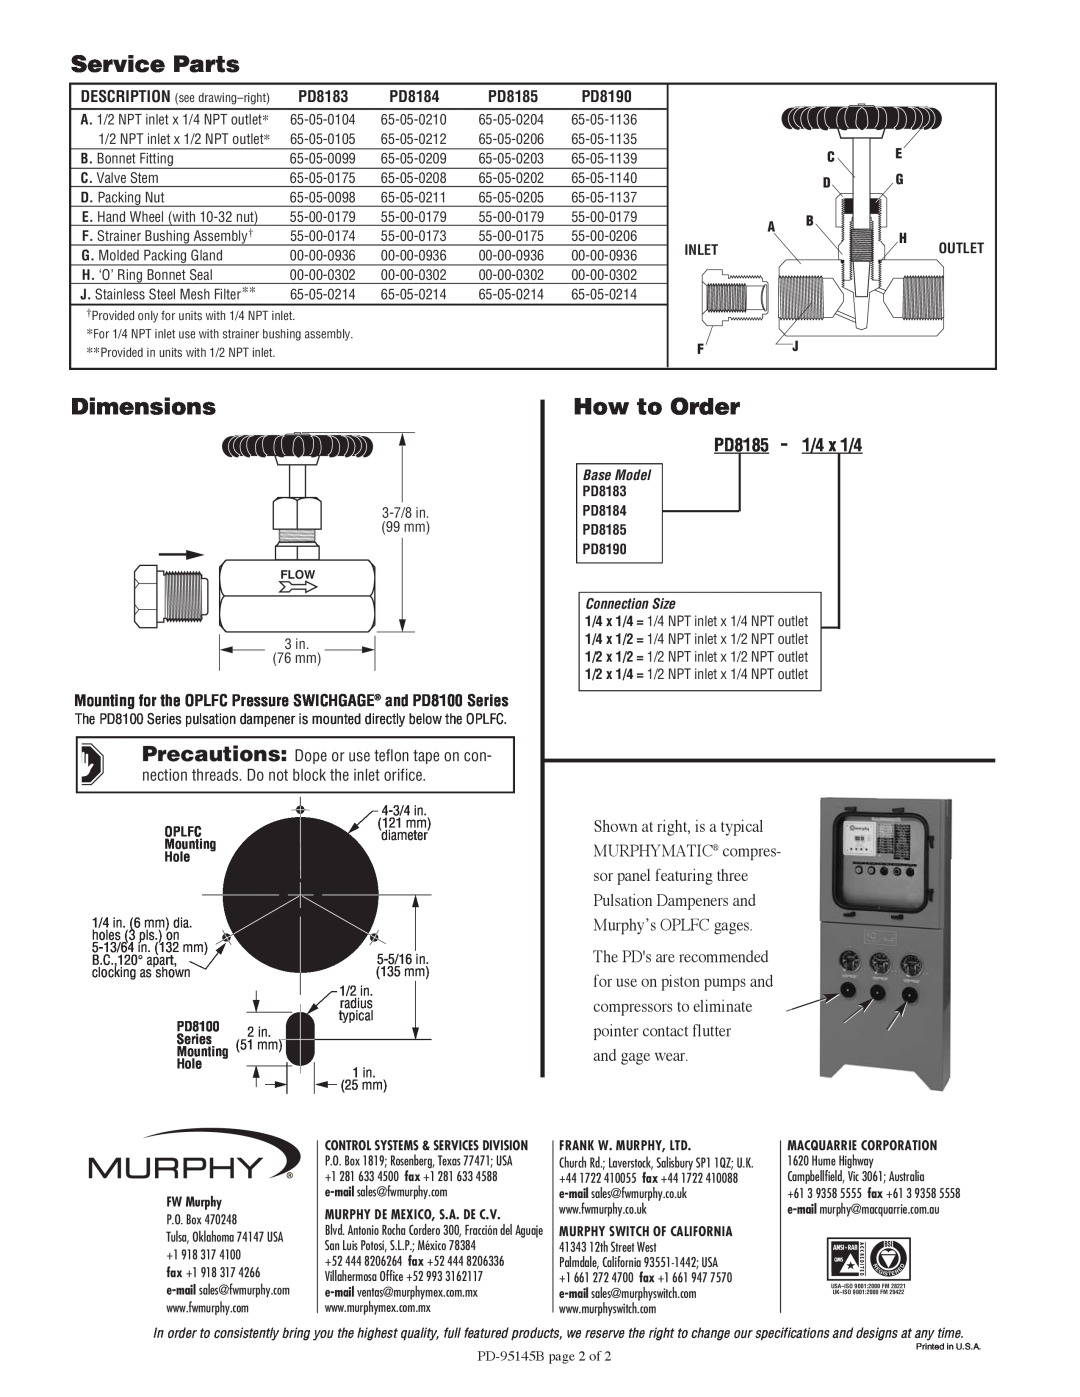 Murphy PD8100 Series specifications Service Parts, Dimensions, How to Order, Murphy’s OPLFC gages, and gage wear, PD8190 